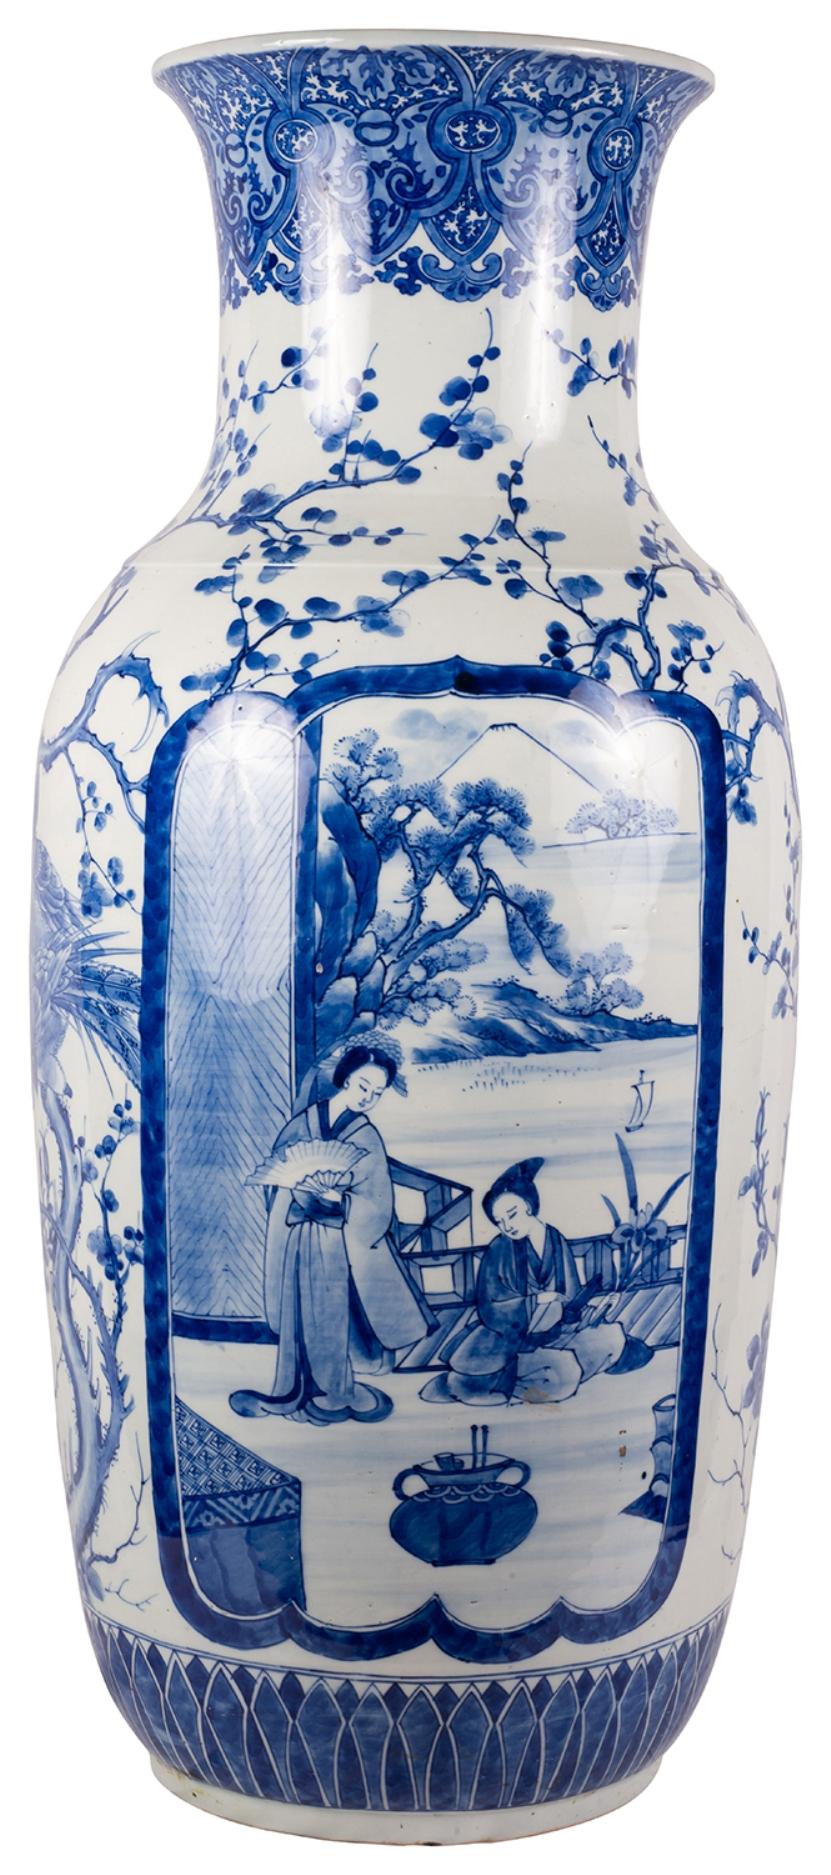 A very impressive pair of Japanese Meiji (1868-1912) period Blue and white porcelain vases, each with wonderful classical motif decoration to the neck and base. Blossom trees to the ground and inset hand painted panels depicting Geisha girls in